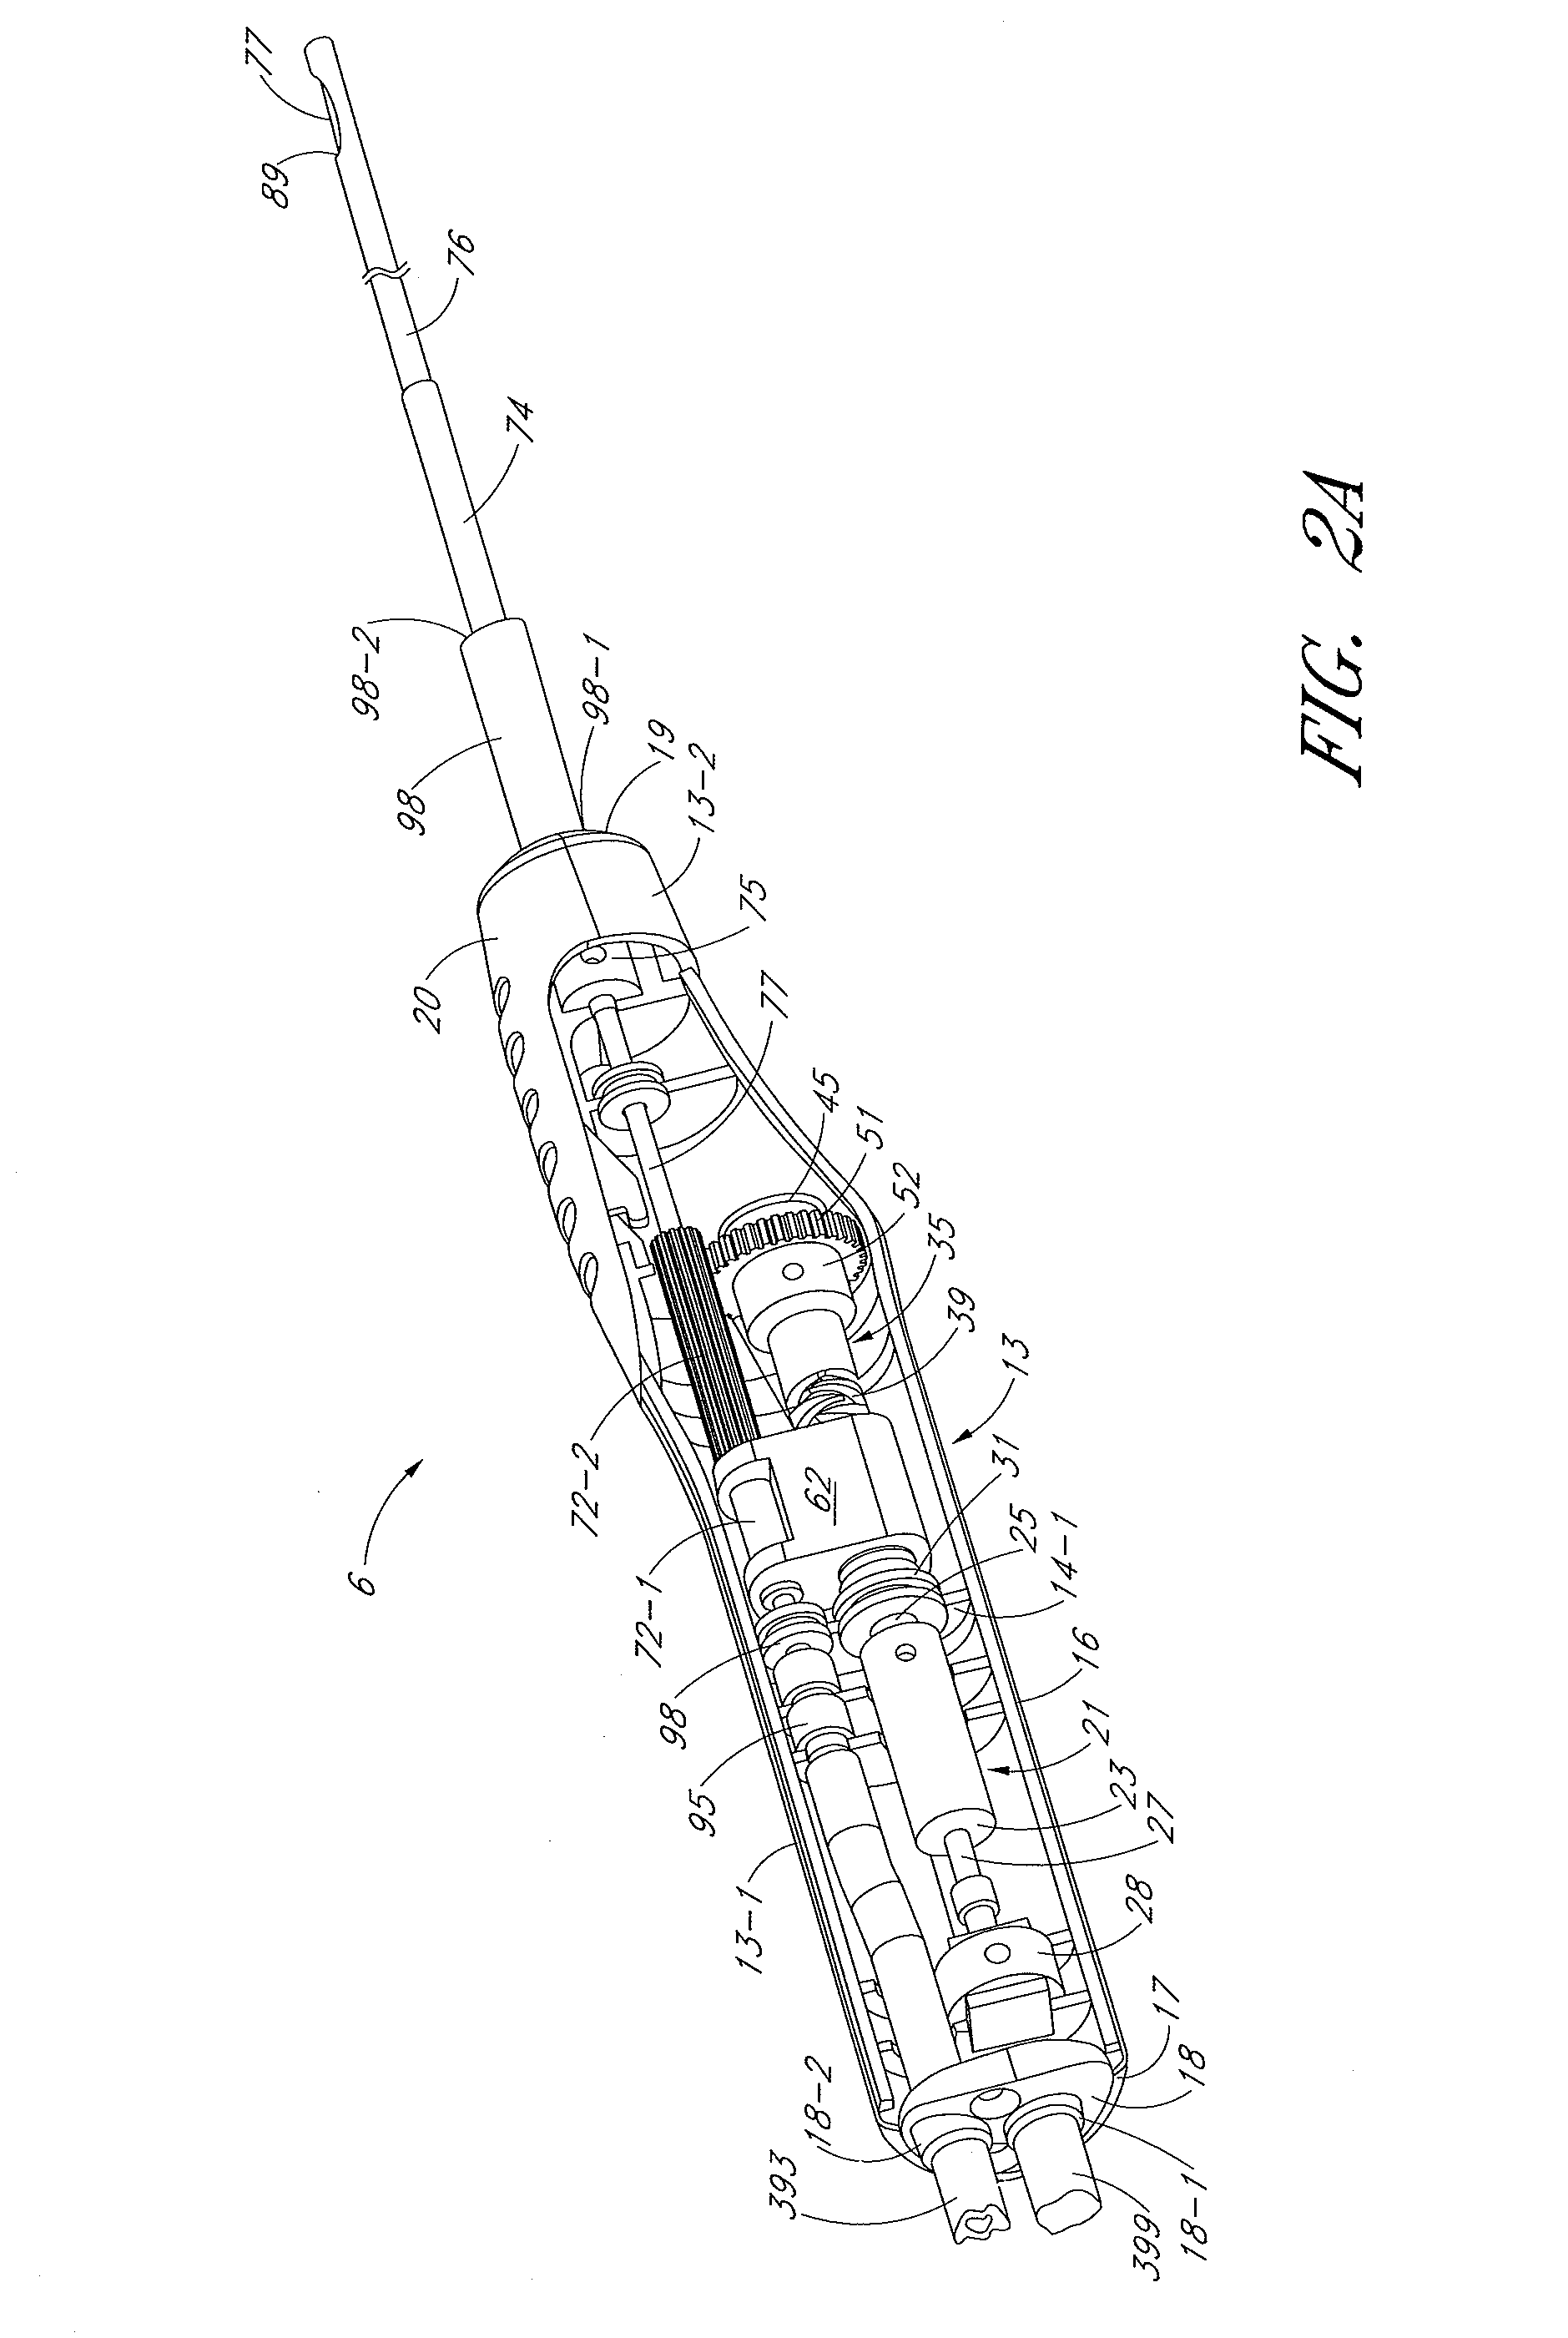 Tissue removal device with high reciprocation rate